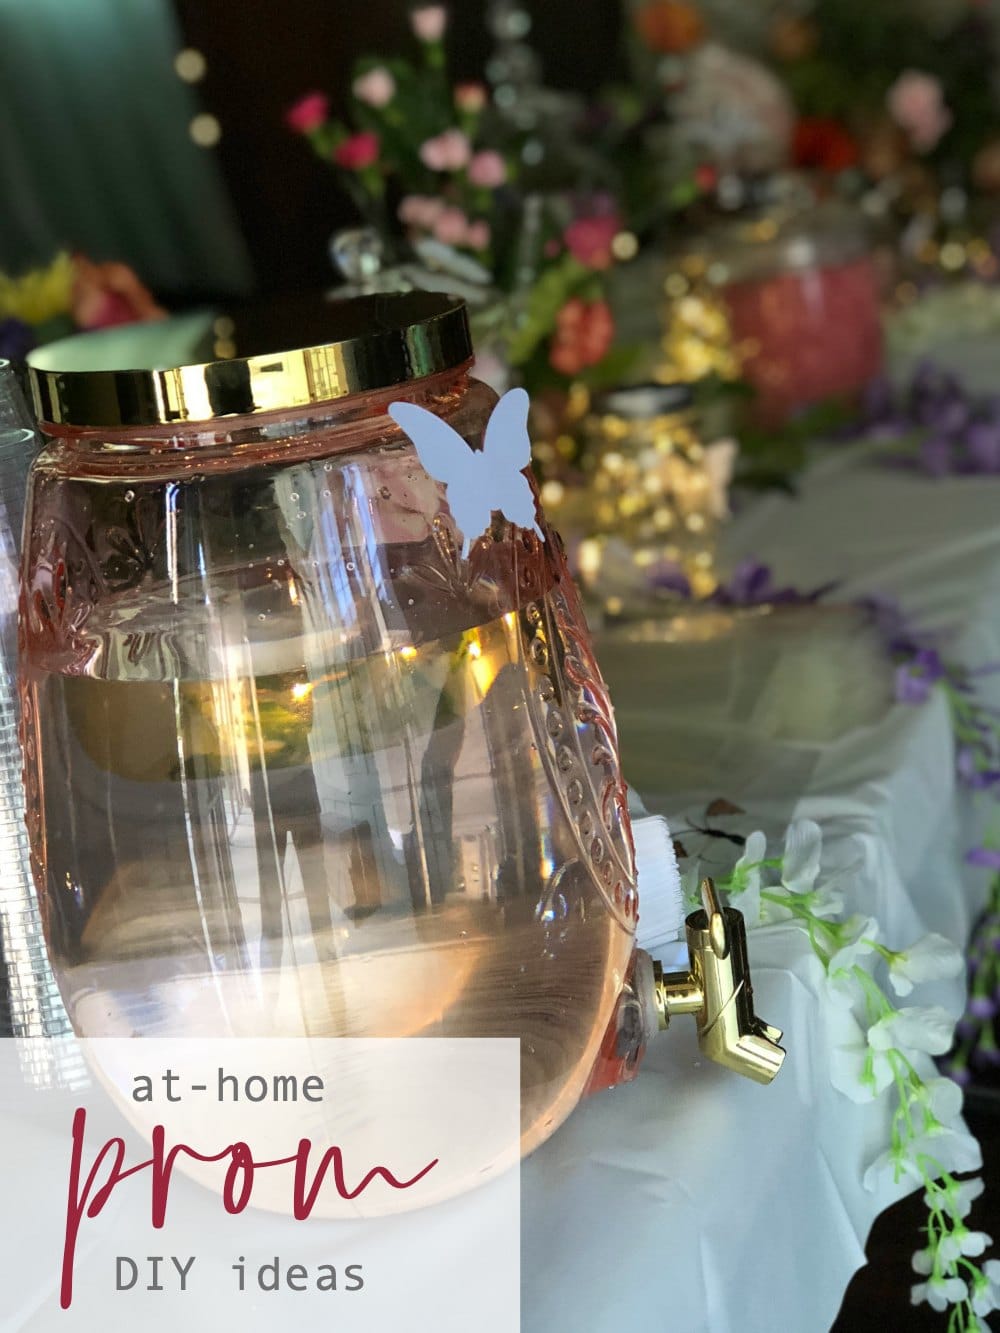 Take the stress out of decorating for prom with these 4 easy ideas! Order all of the items for prom and have them delivered to your home! Create a DIY photo backdrop, an easy candy bar plus lighting and more for the ultimate at-home prom!